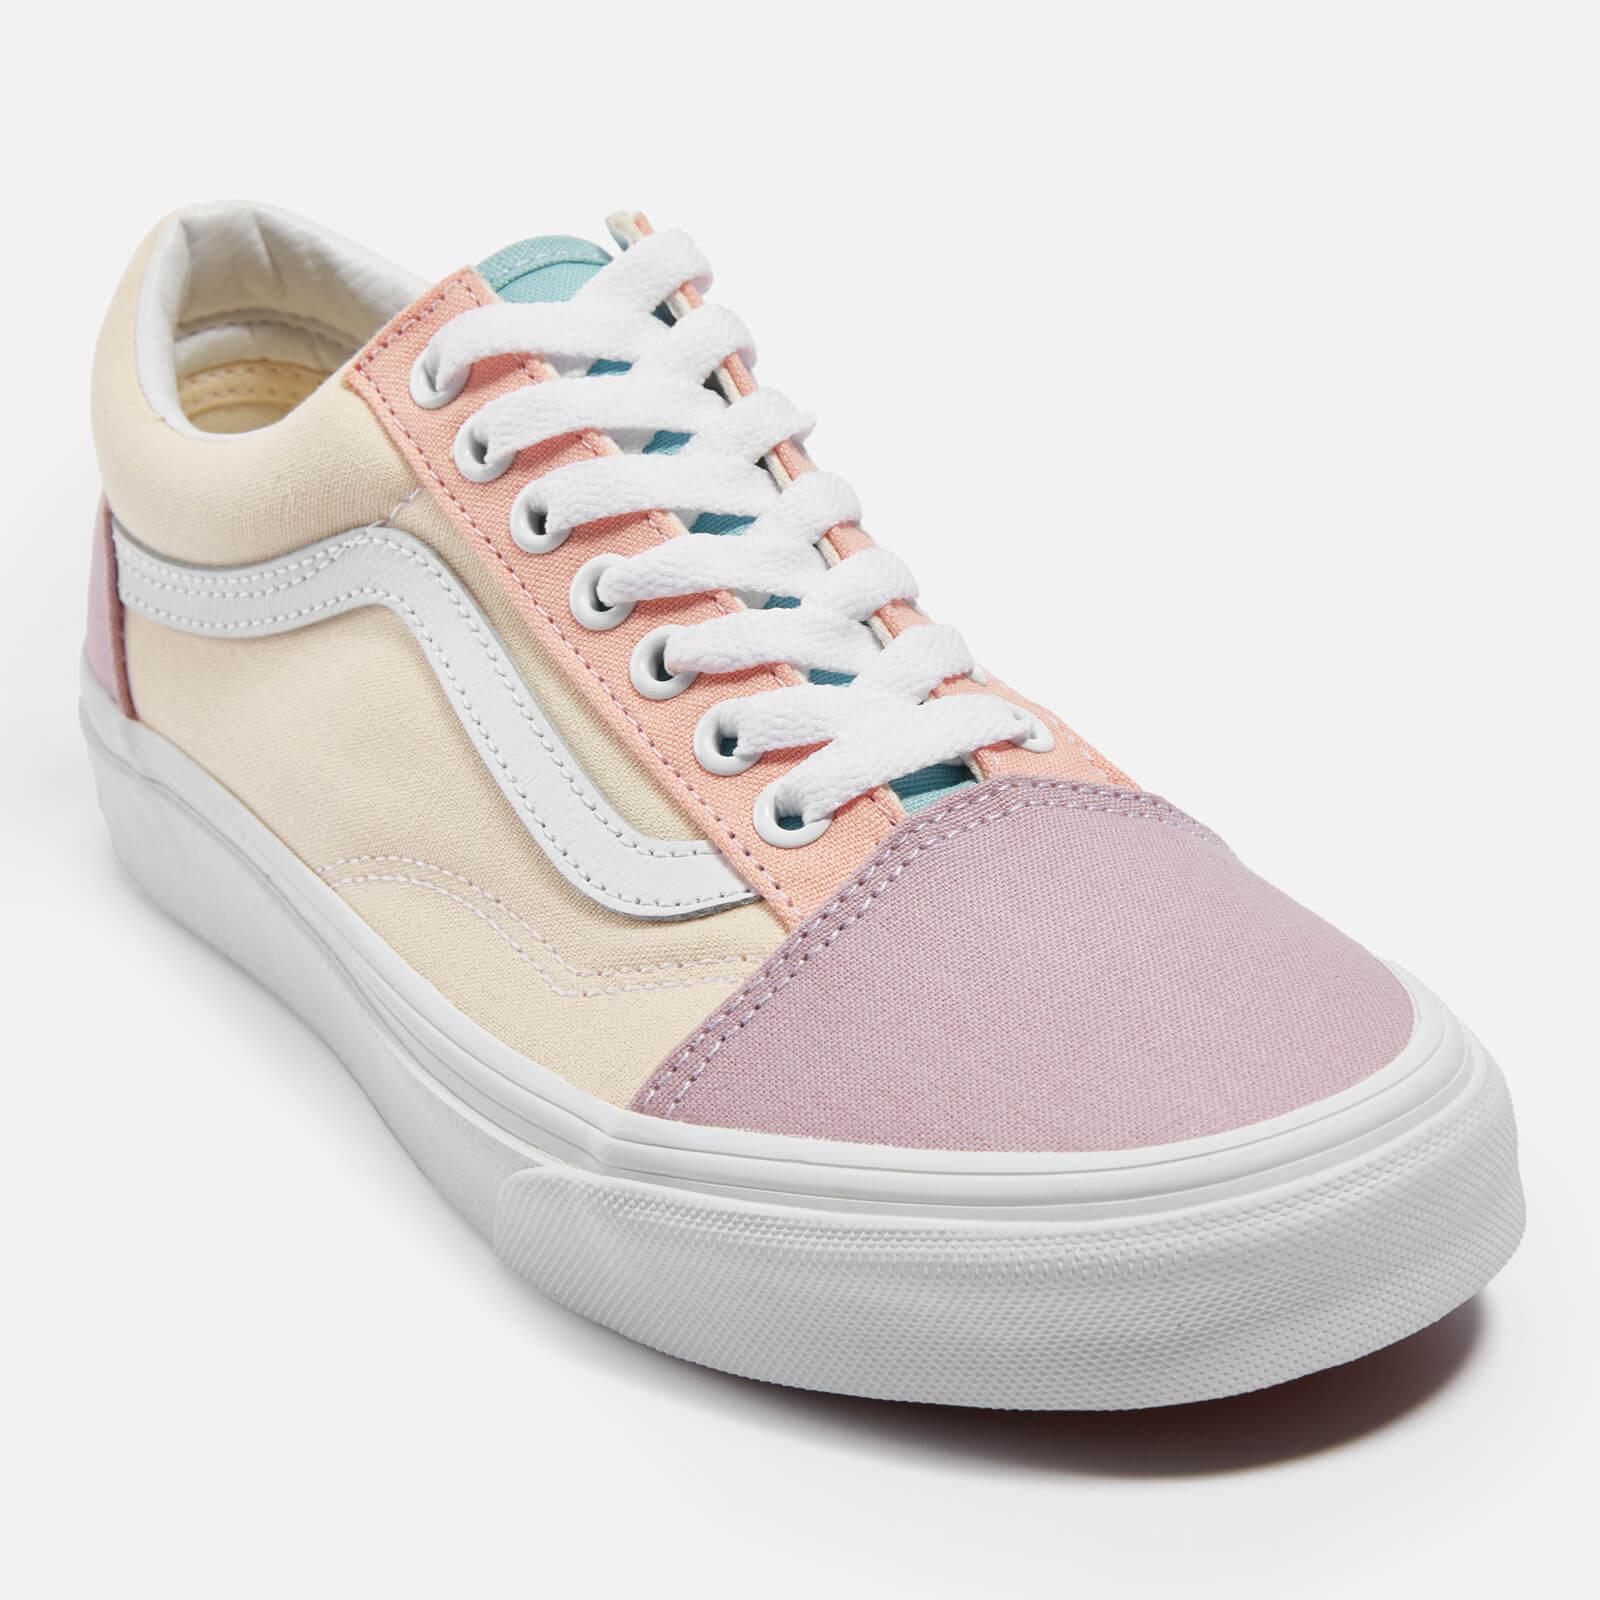 Vans Pastel Block Authentic Canvas Trainers in Gray | Lyst